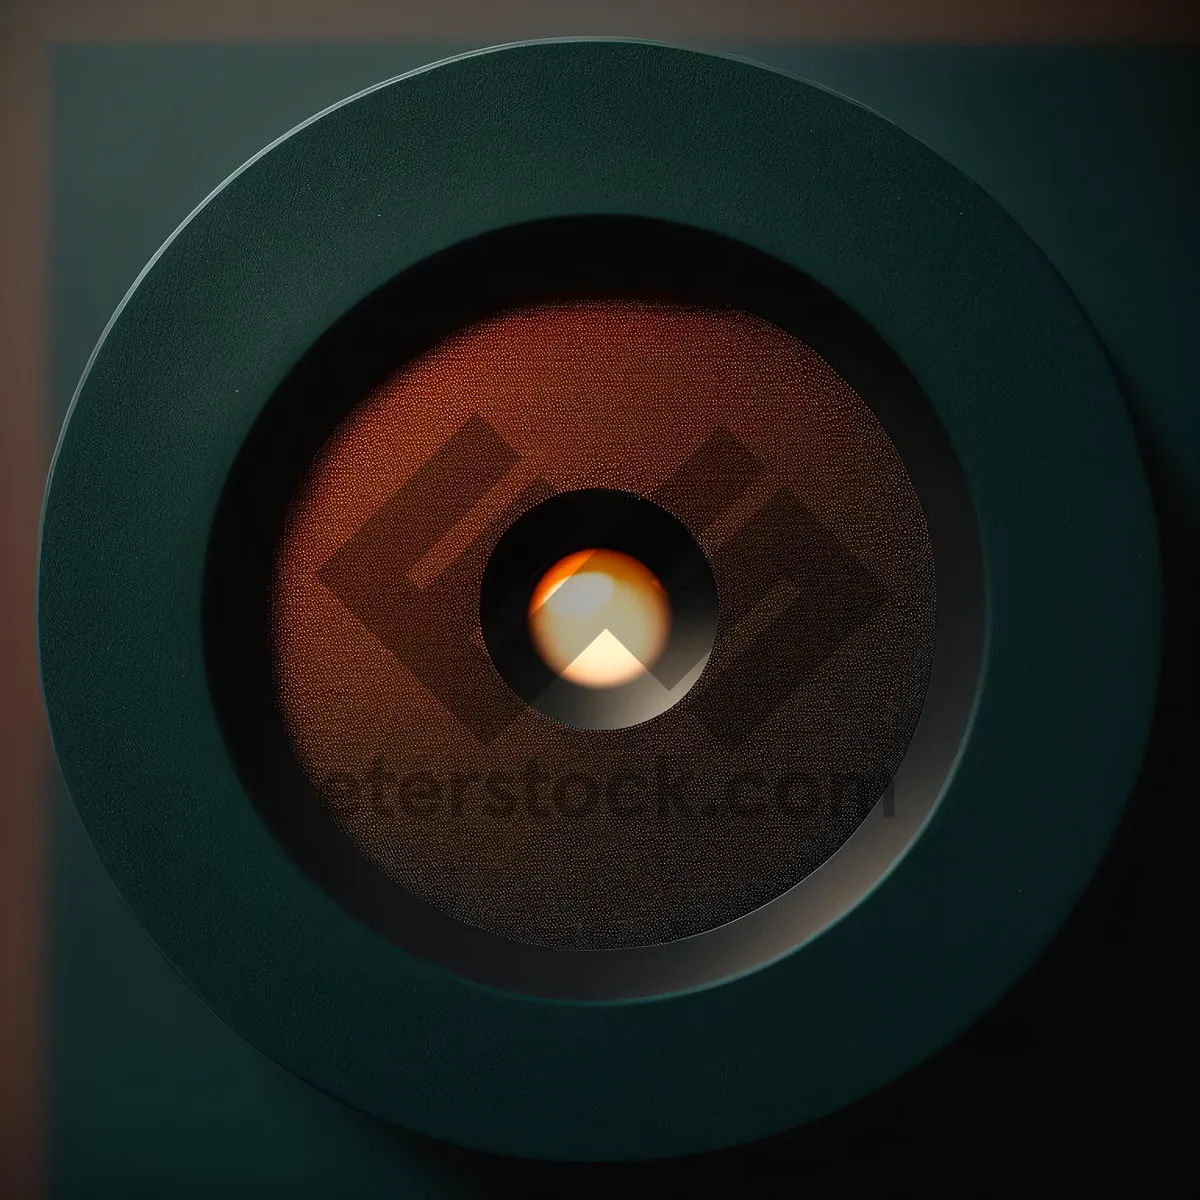 Picture of Bass Booming Stereo Speaker in Spotlight